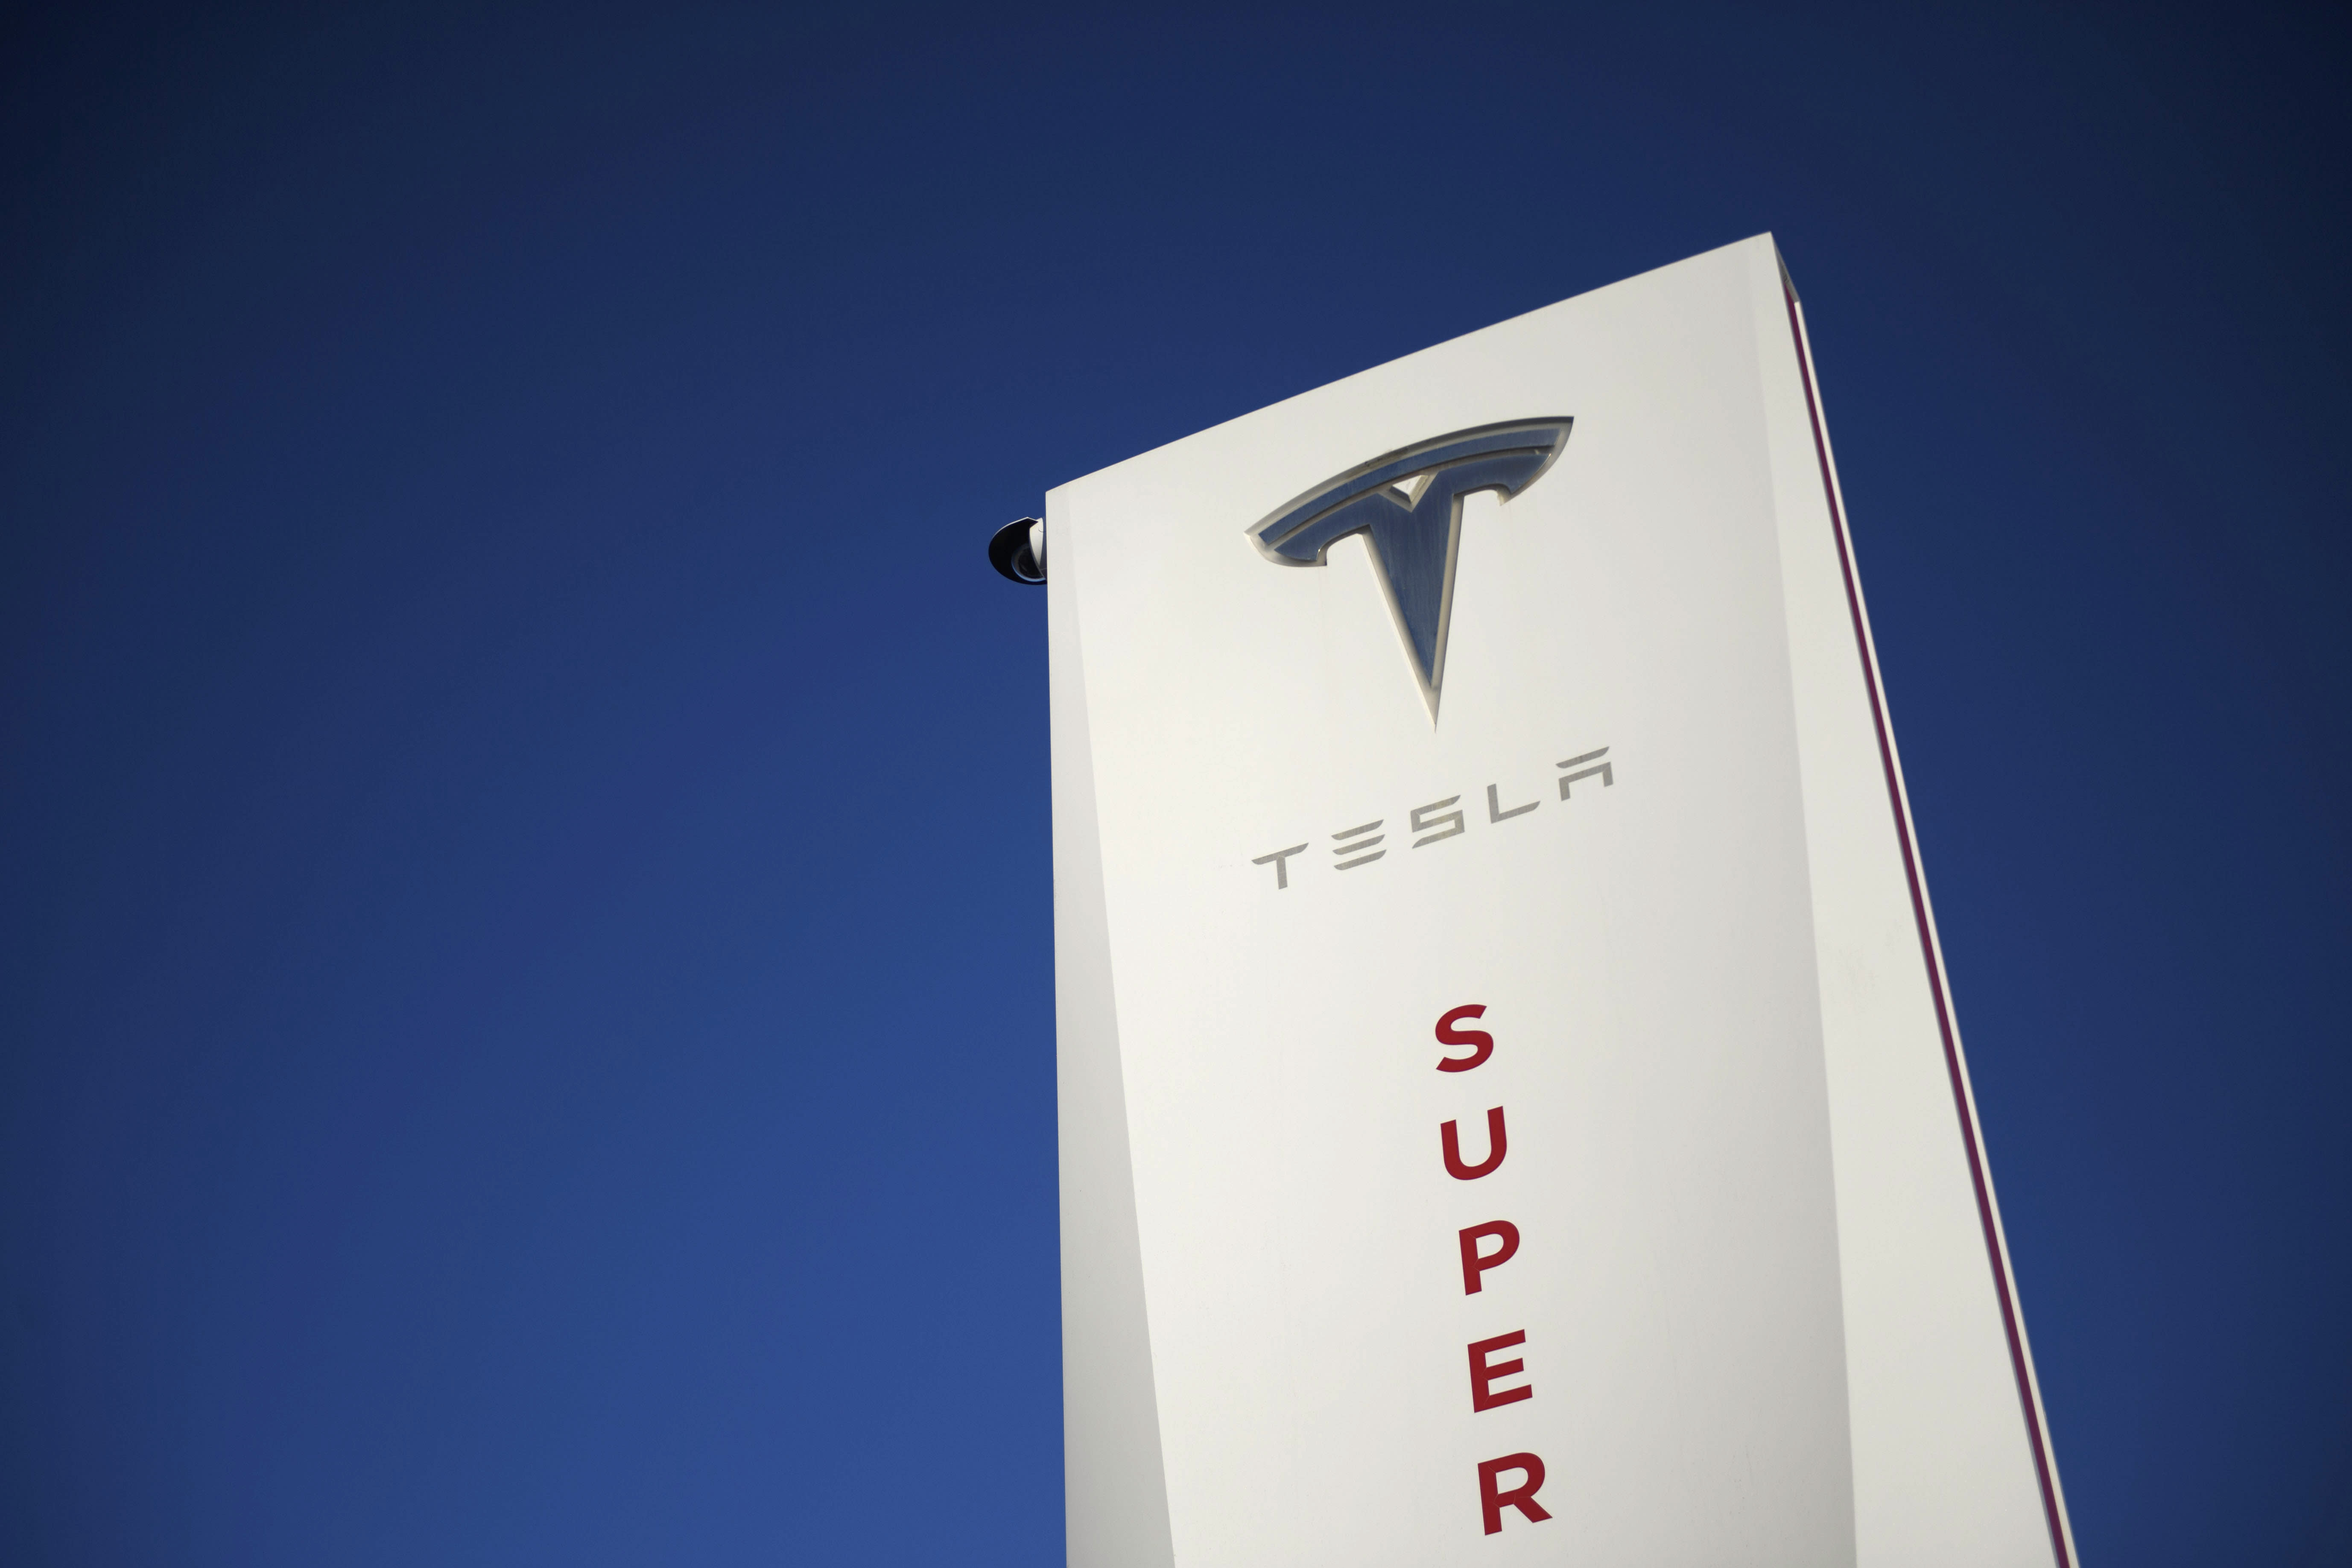 Tesla Superchargers to be used at new UK electric vehicle hub